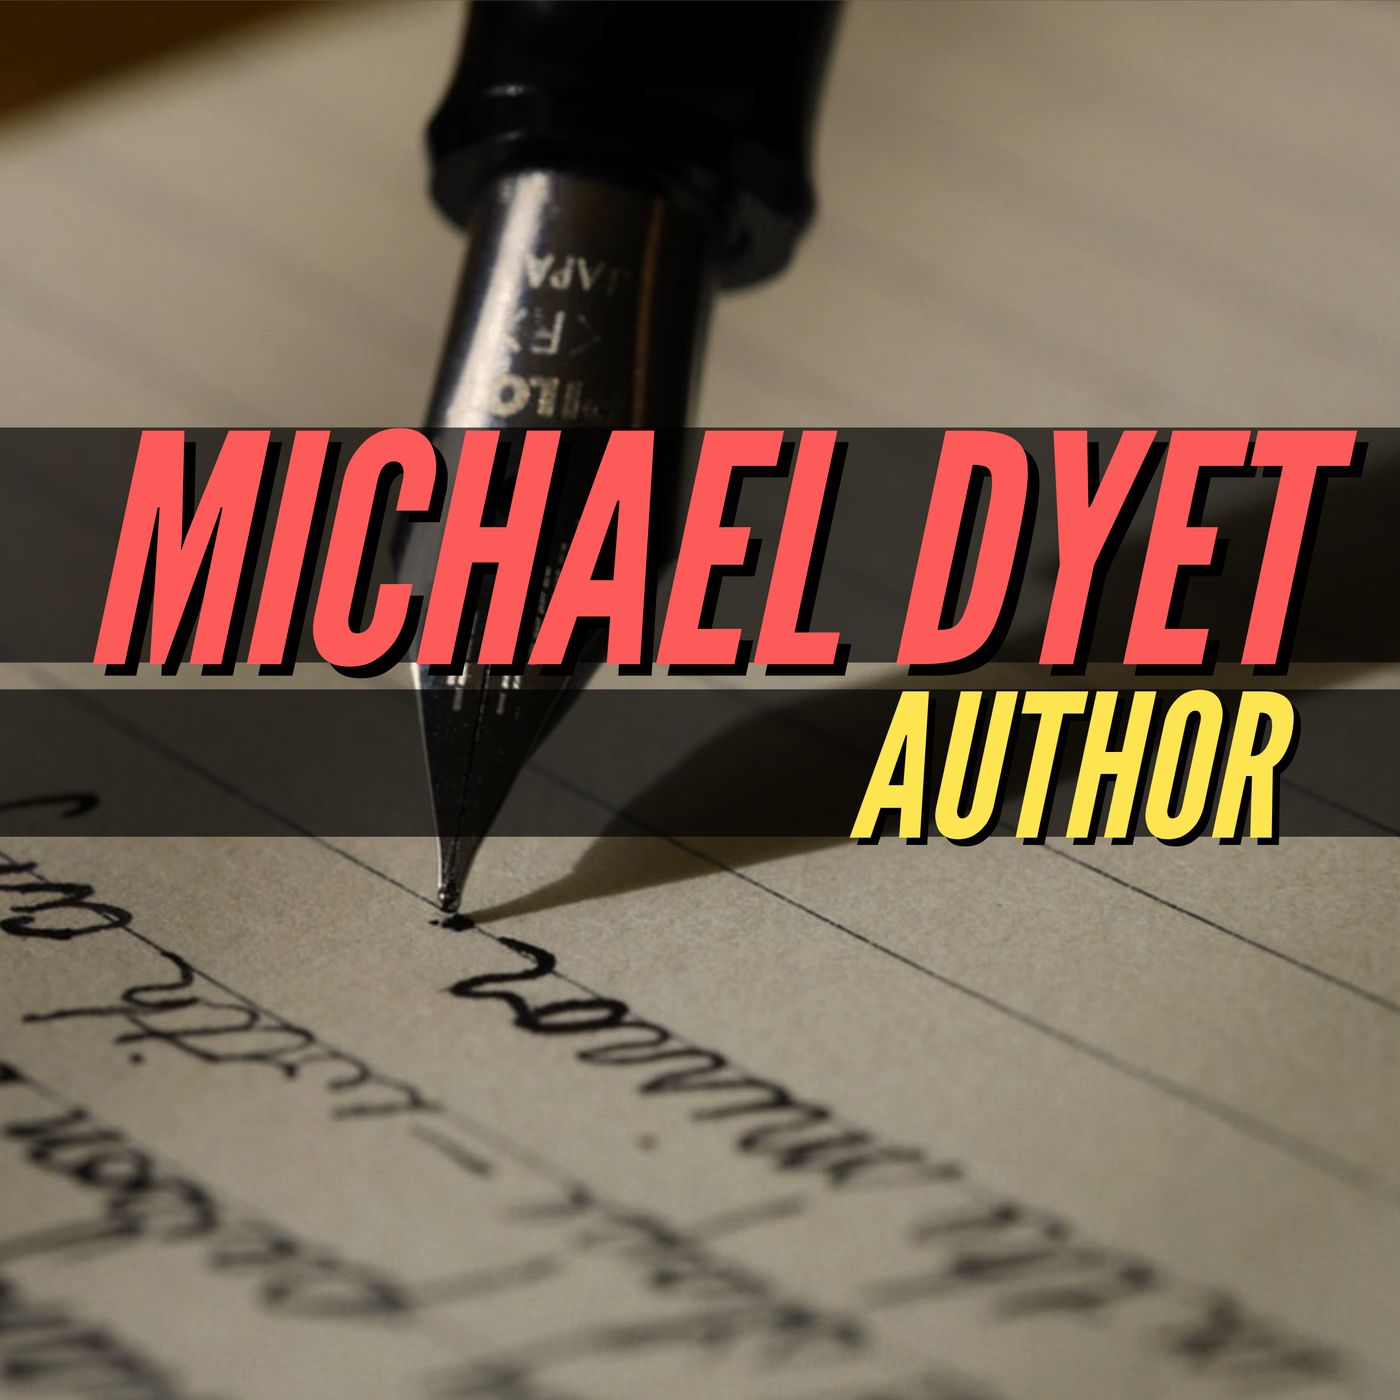 Michael Dyet Author of Hunting Muskie Rites of Passage - Stories by Michael Robert Dyet